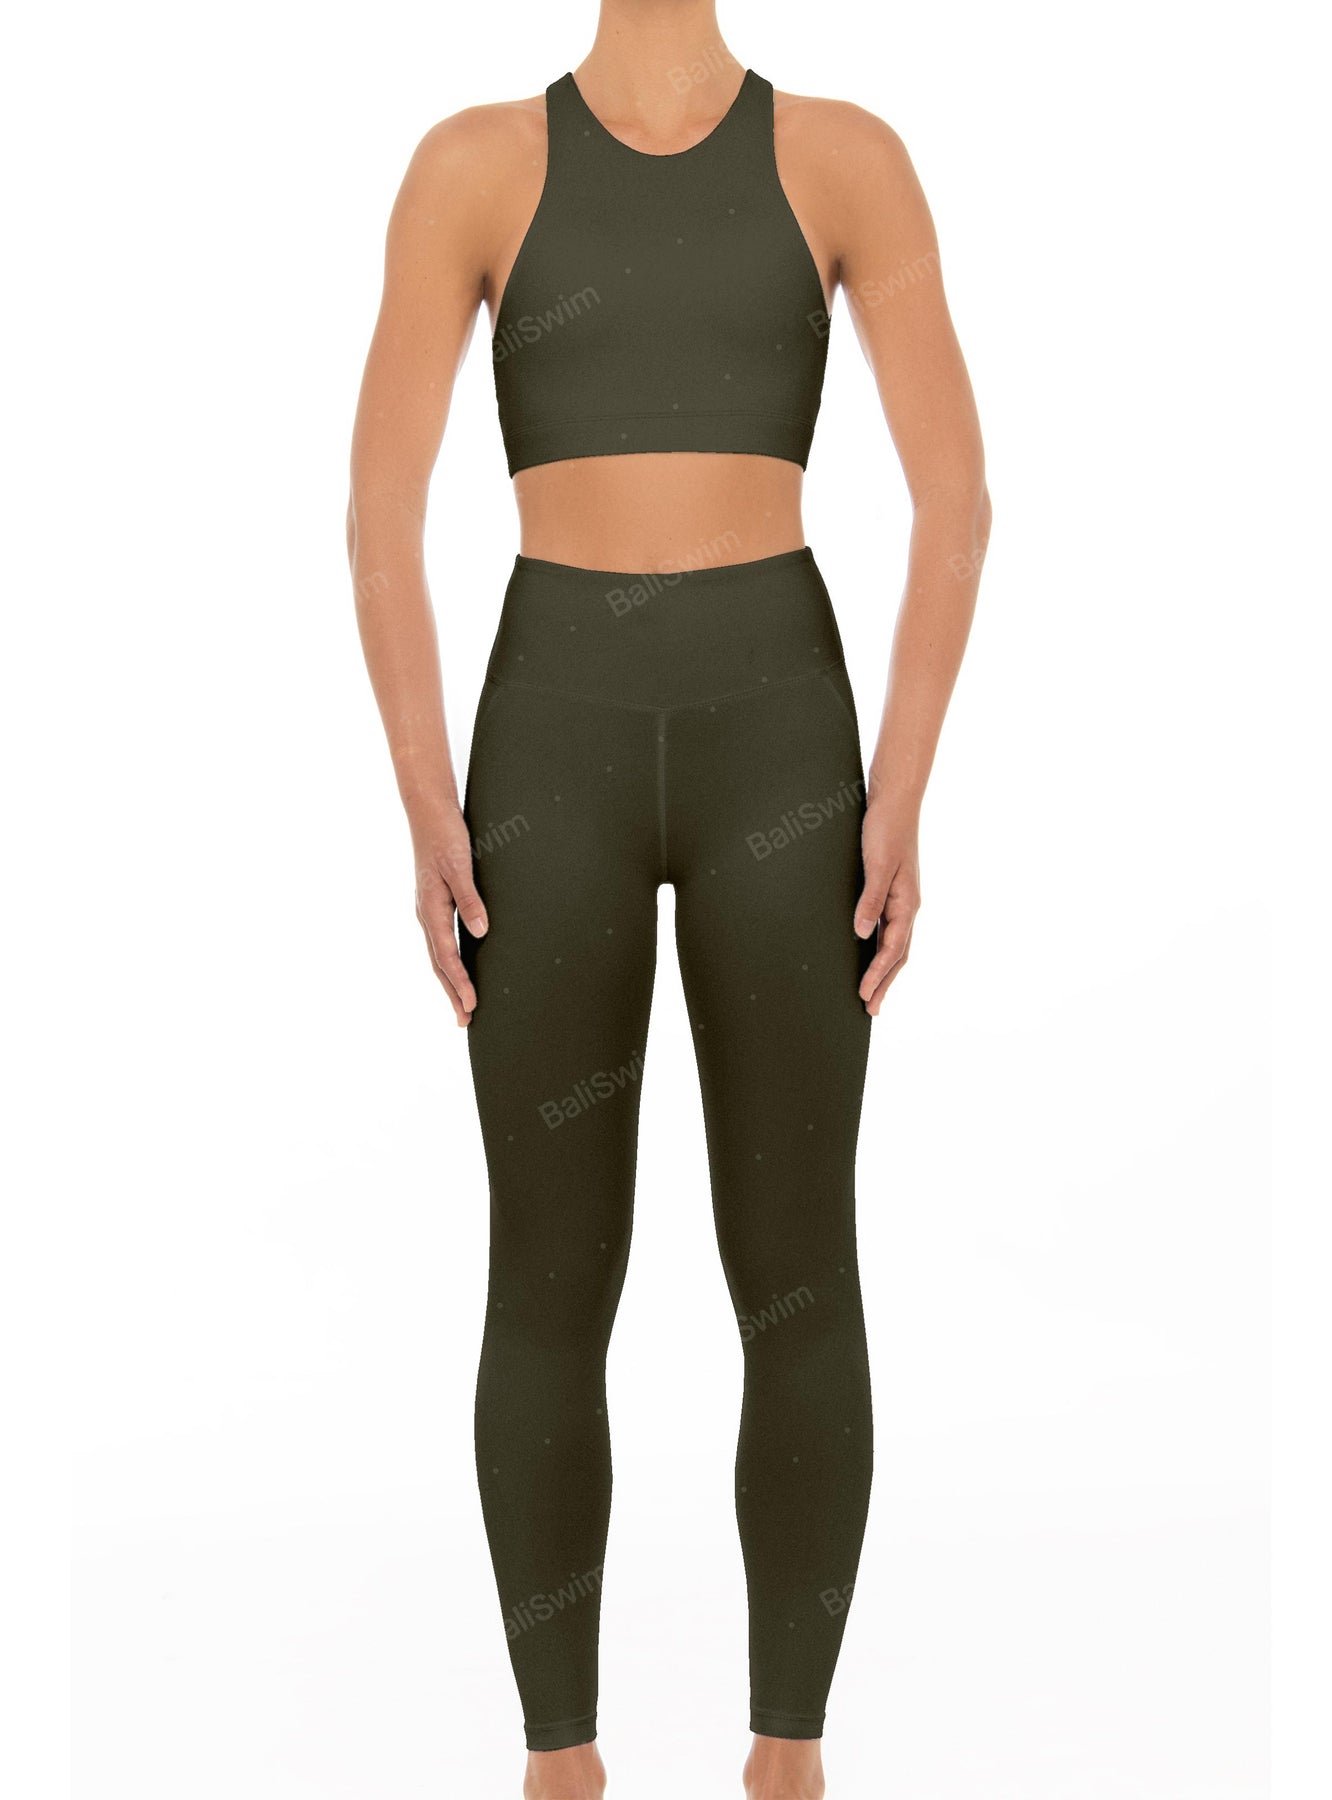 ON Movement Stretch Recycled-jersey Leggings NET-A-PORTER, 50% OFF